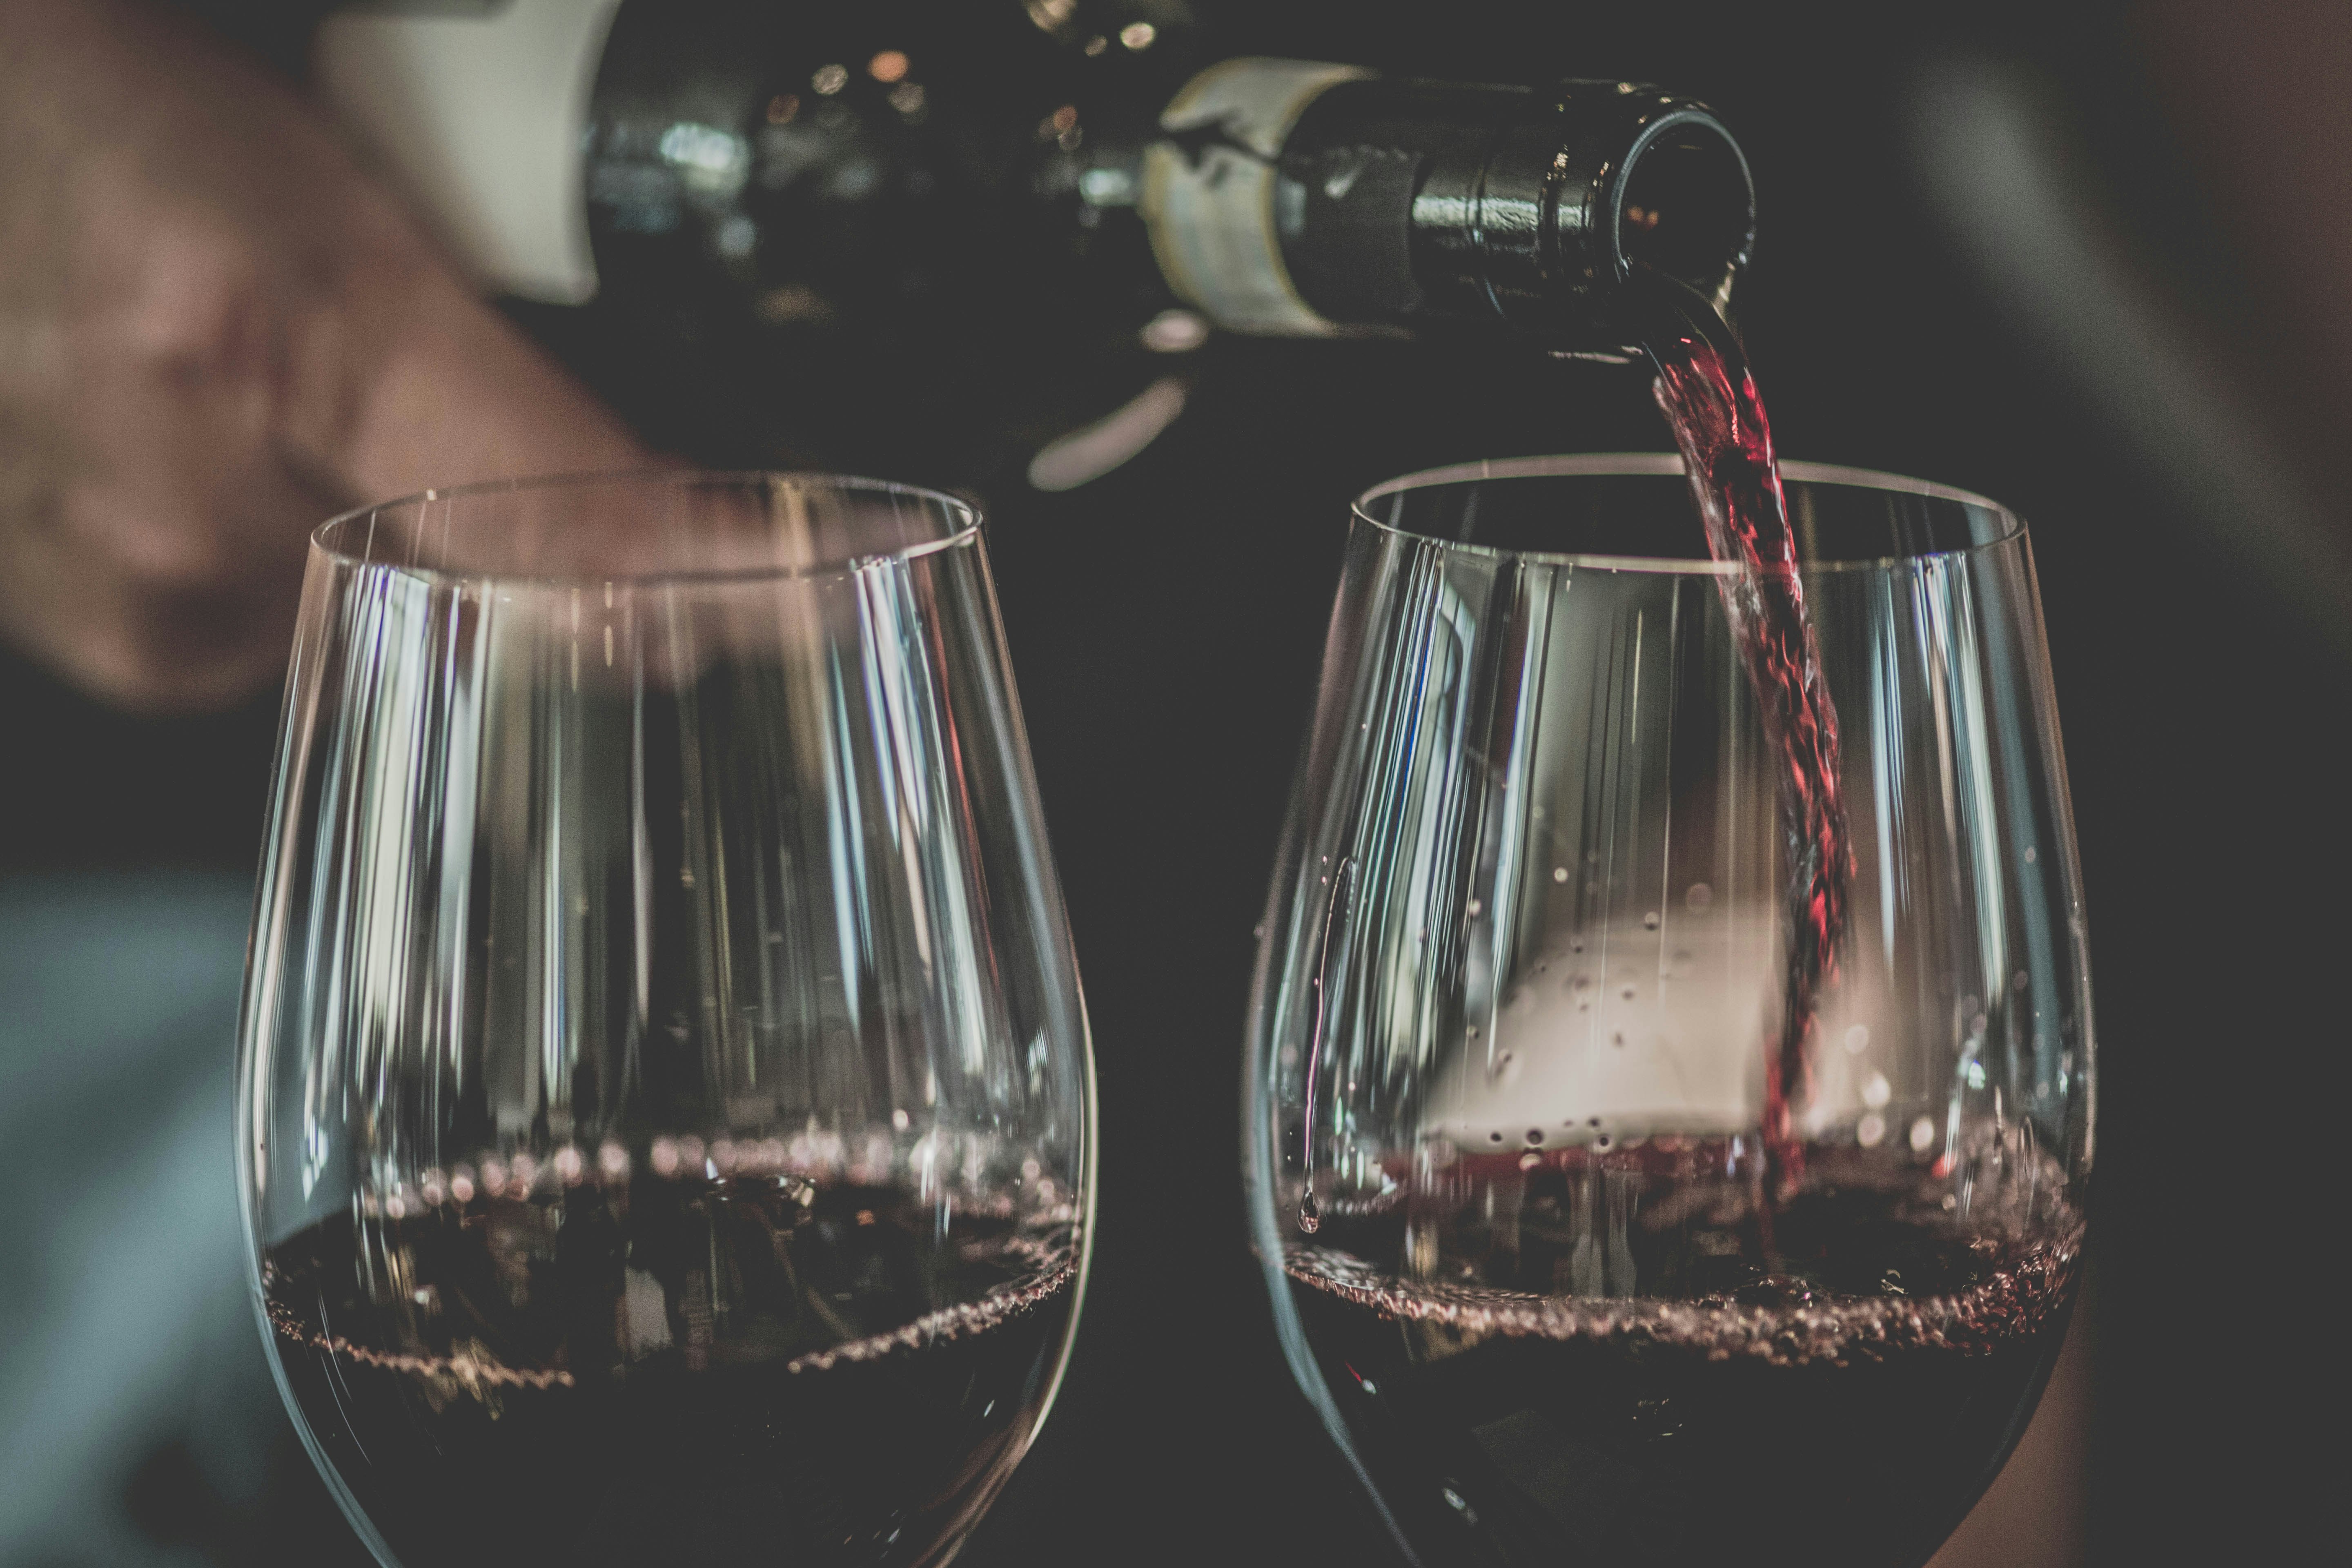 A bottle of red wine being poured into two empty wine glasses